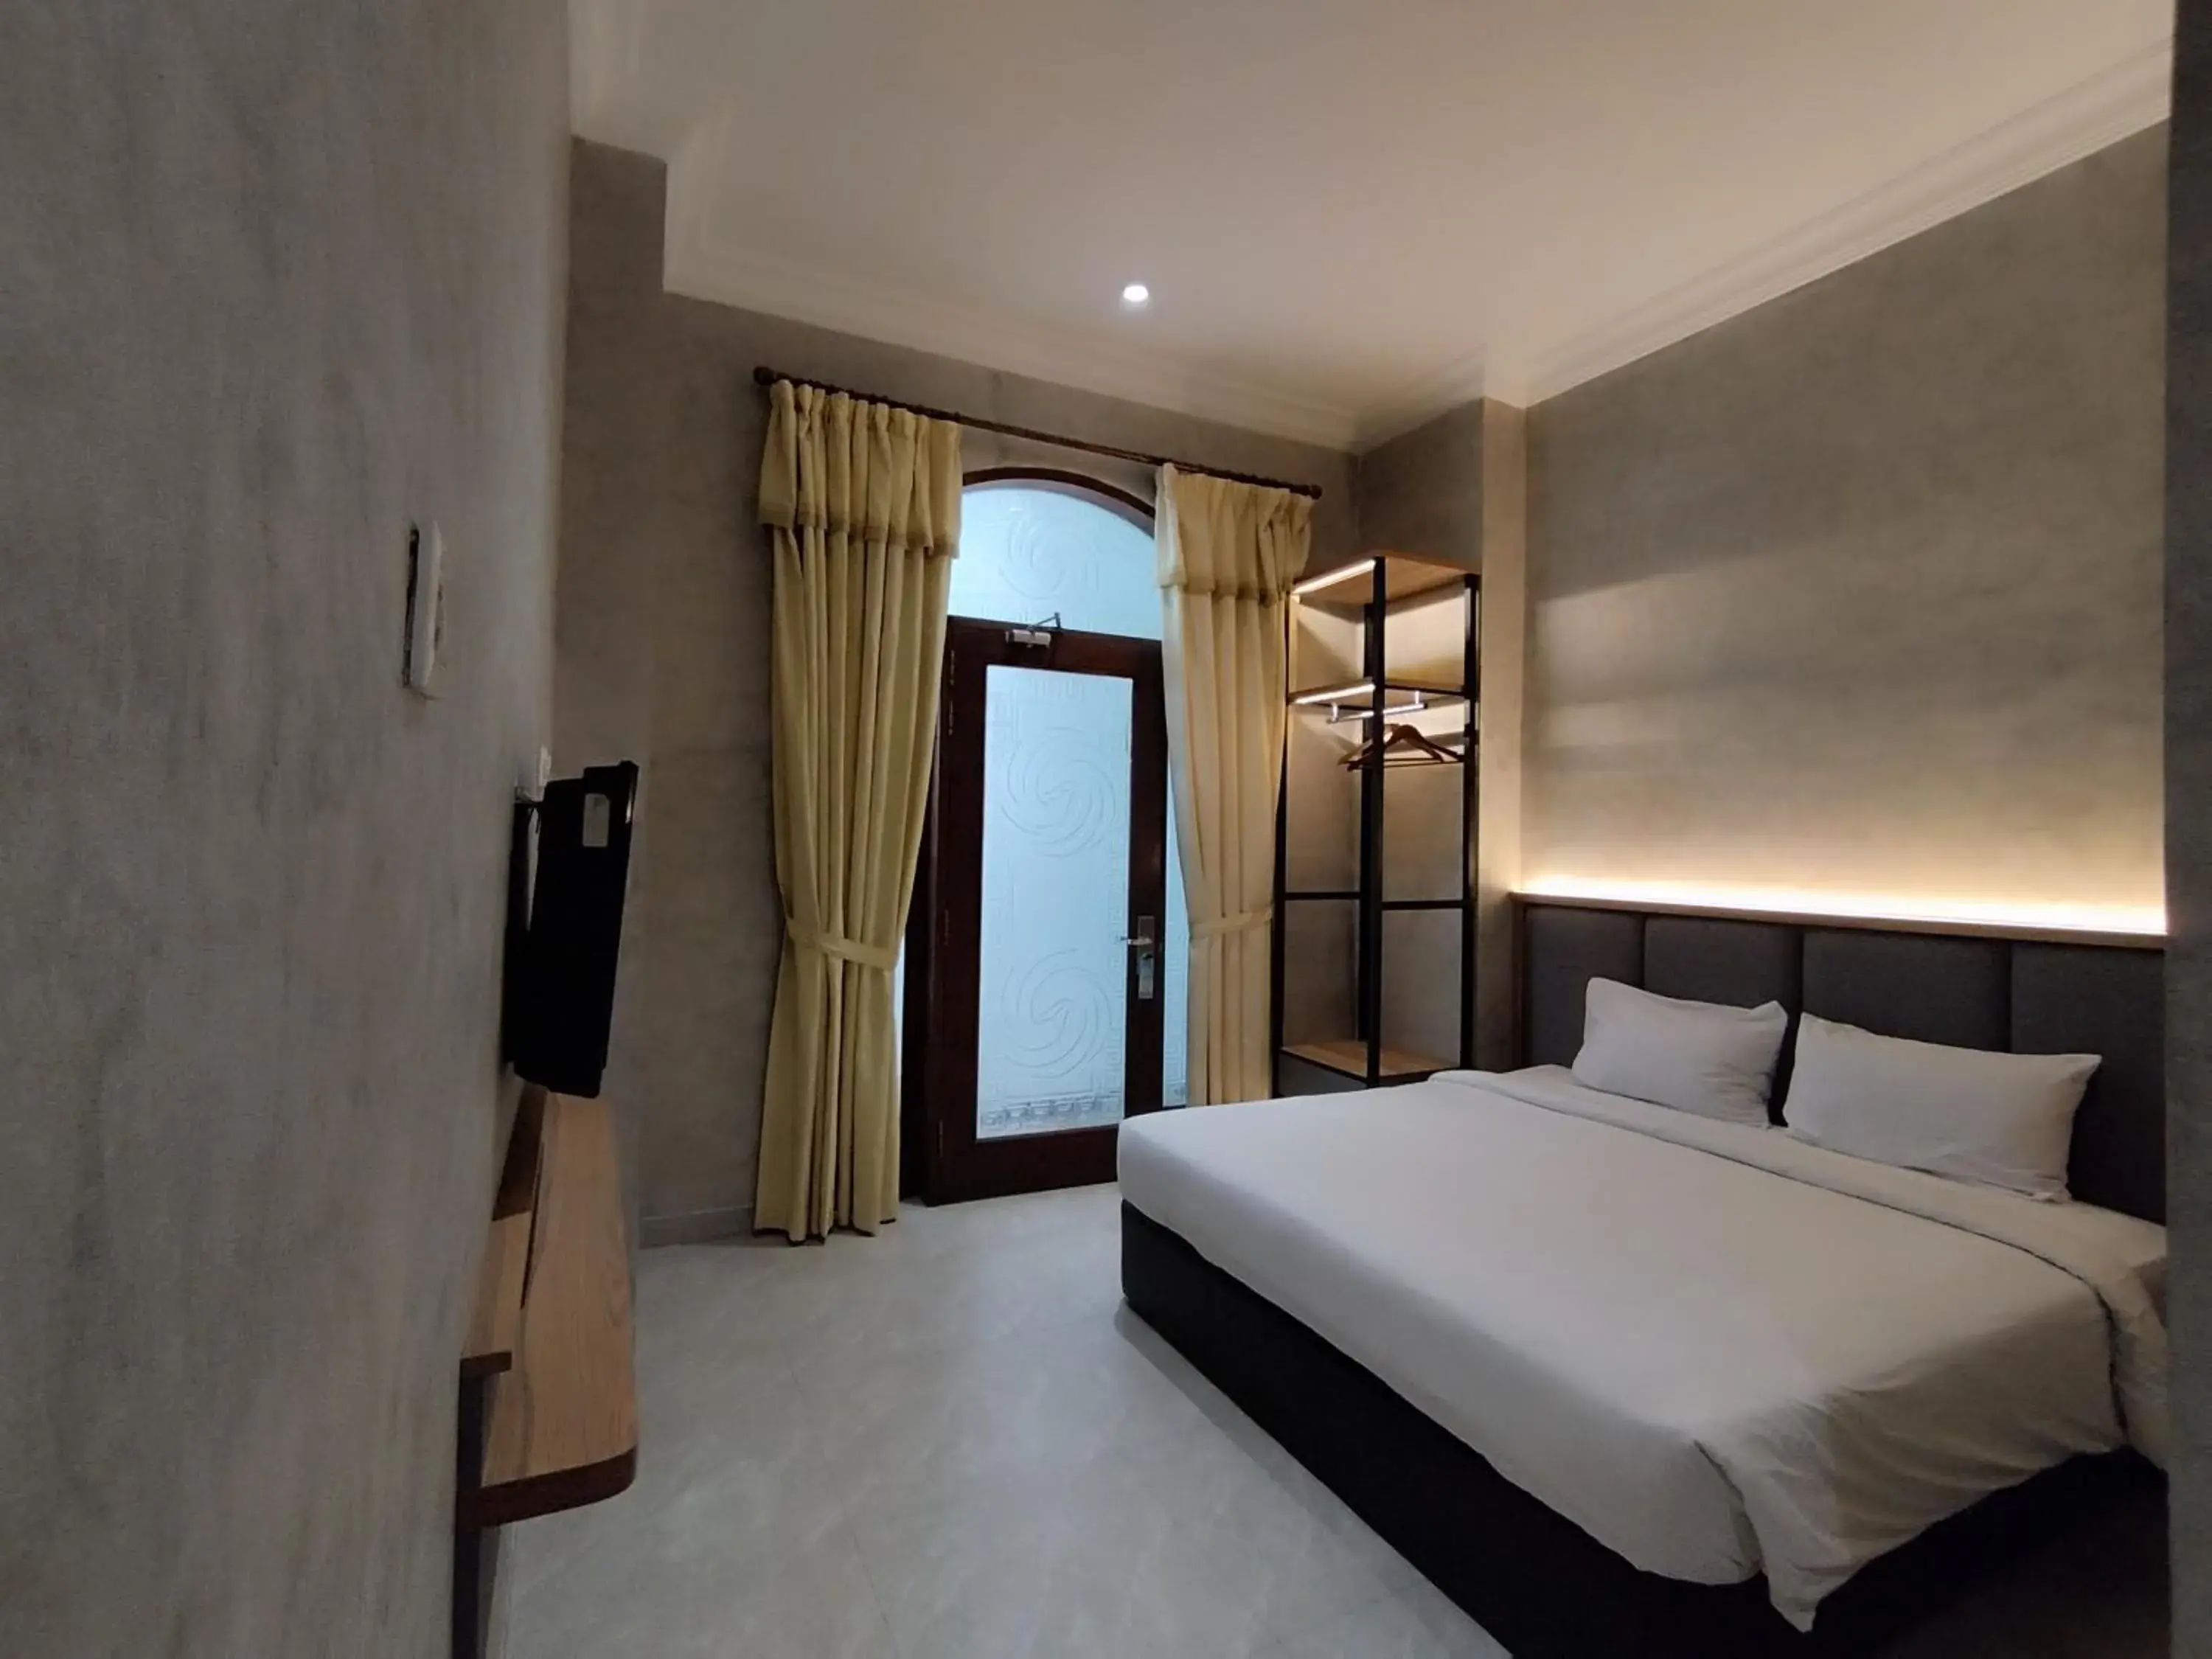 Property building in The Grand Palace Hotel Malang